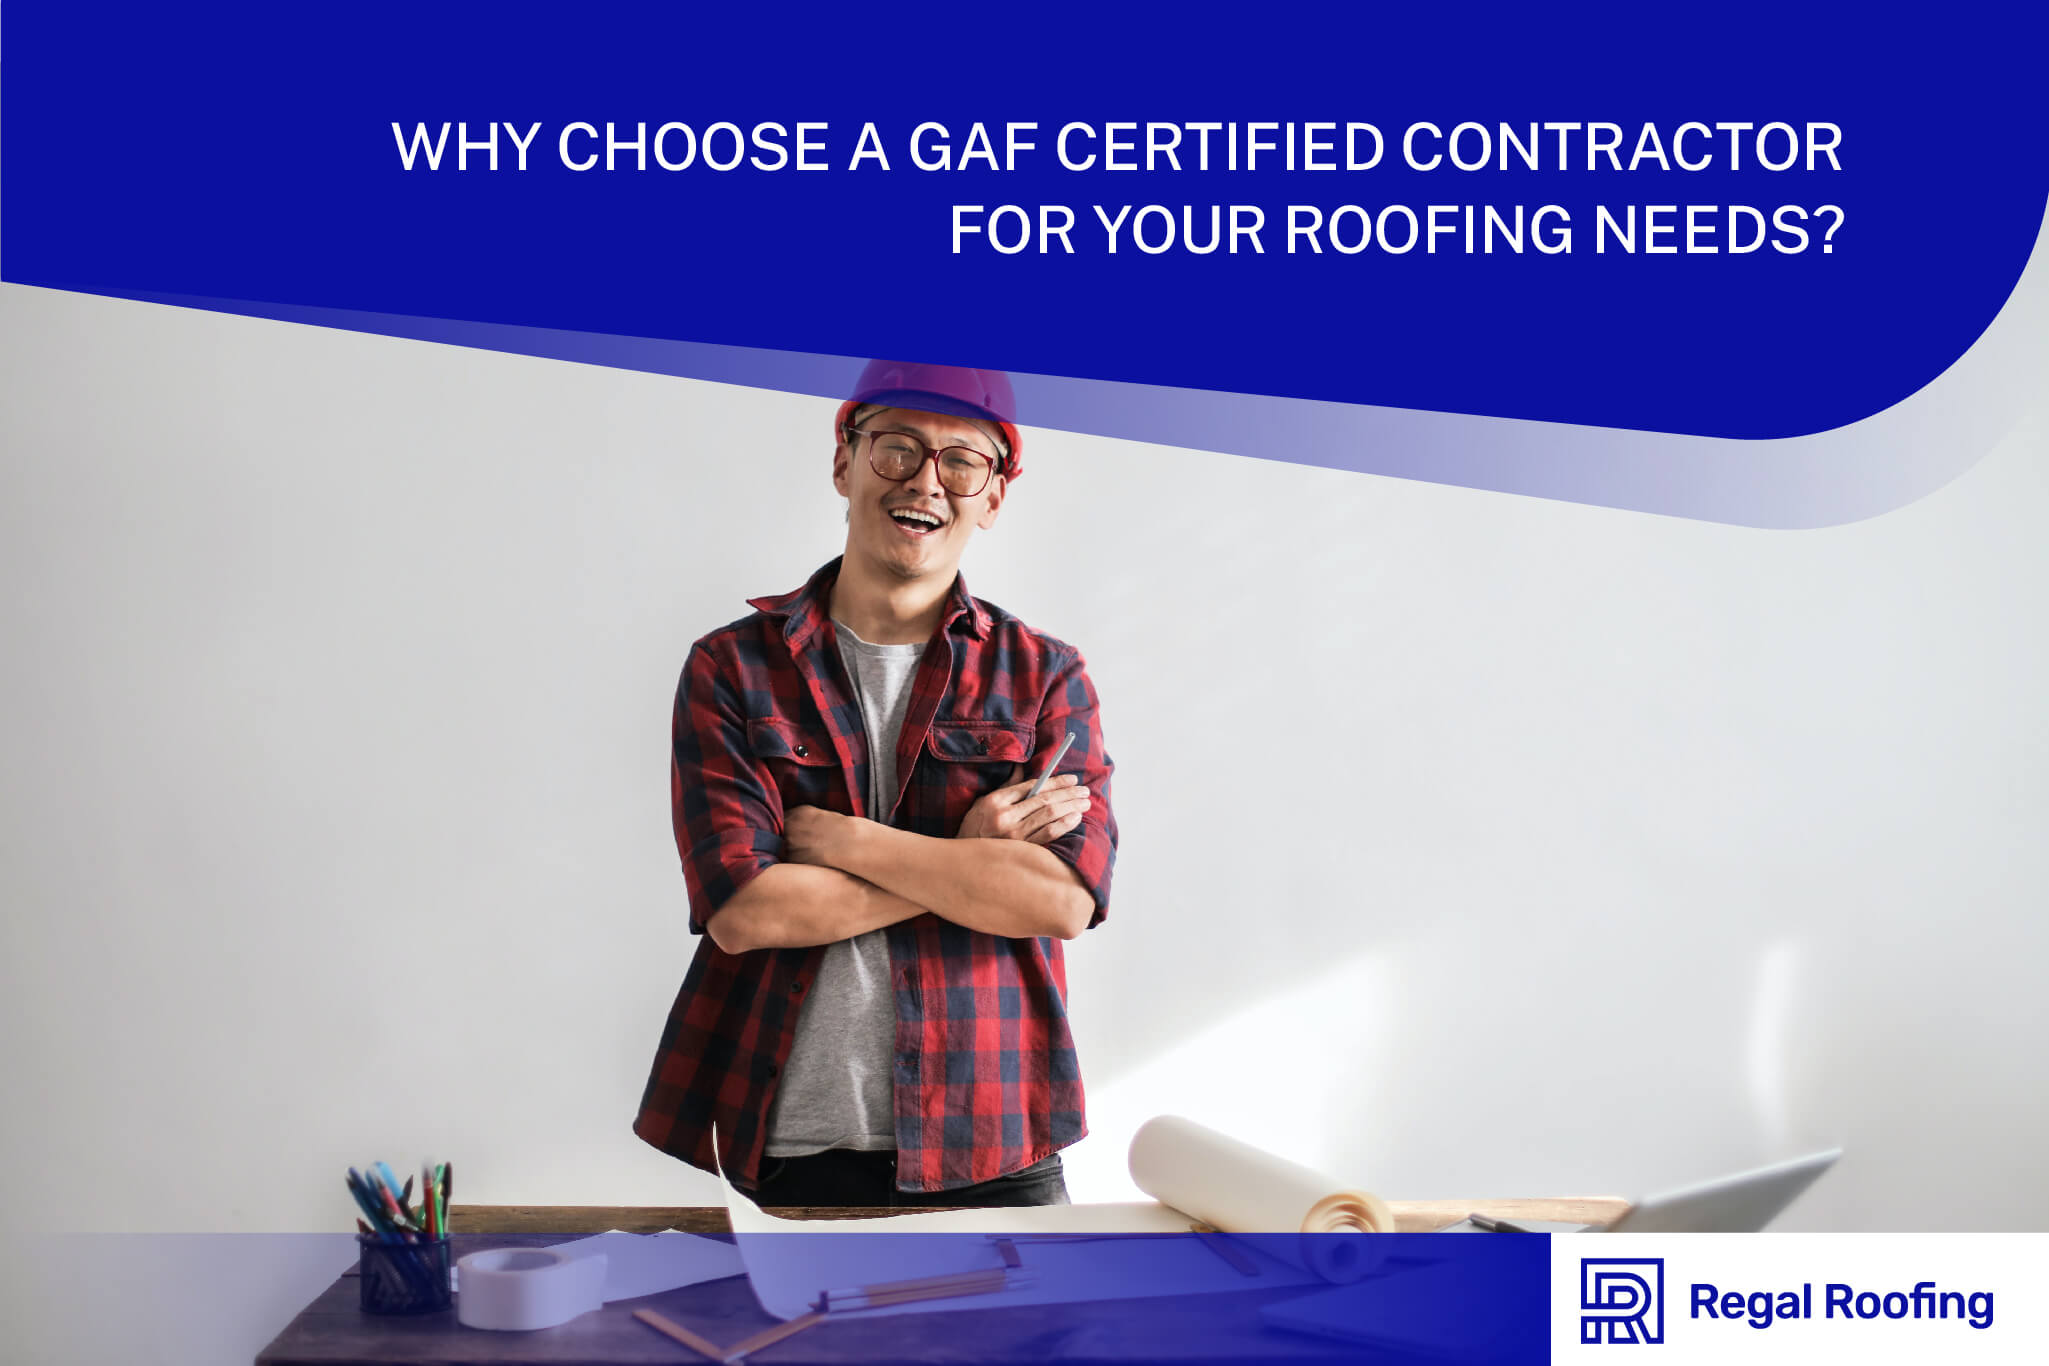 A smiling GAF Certified Contractor